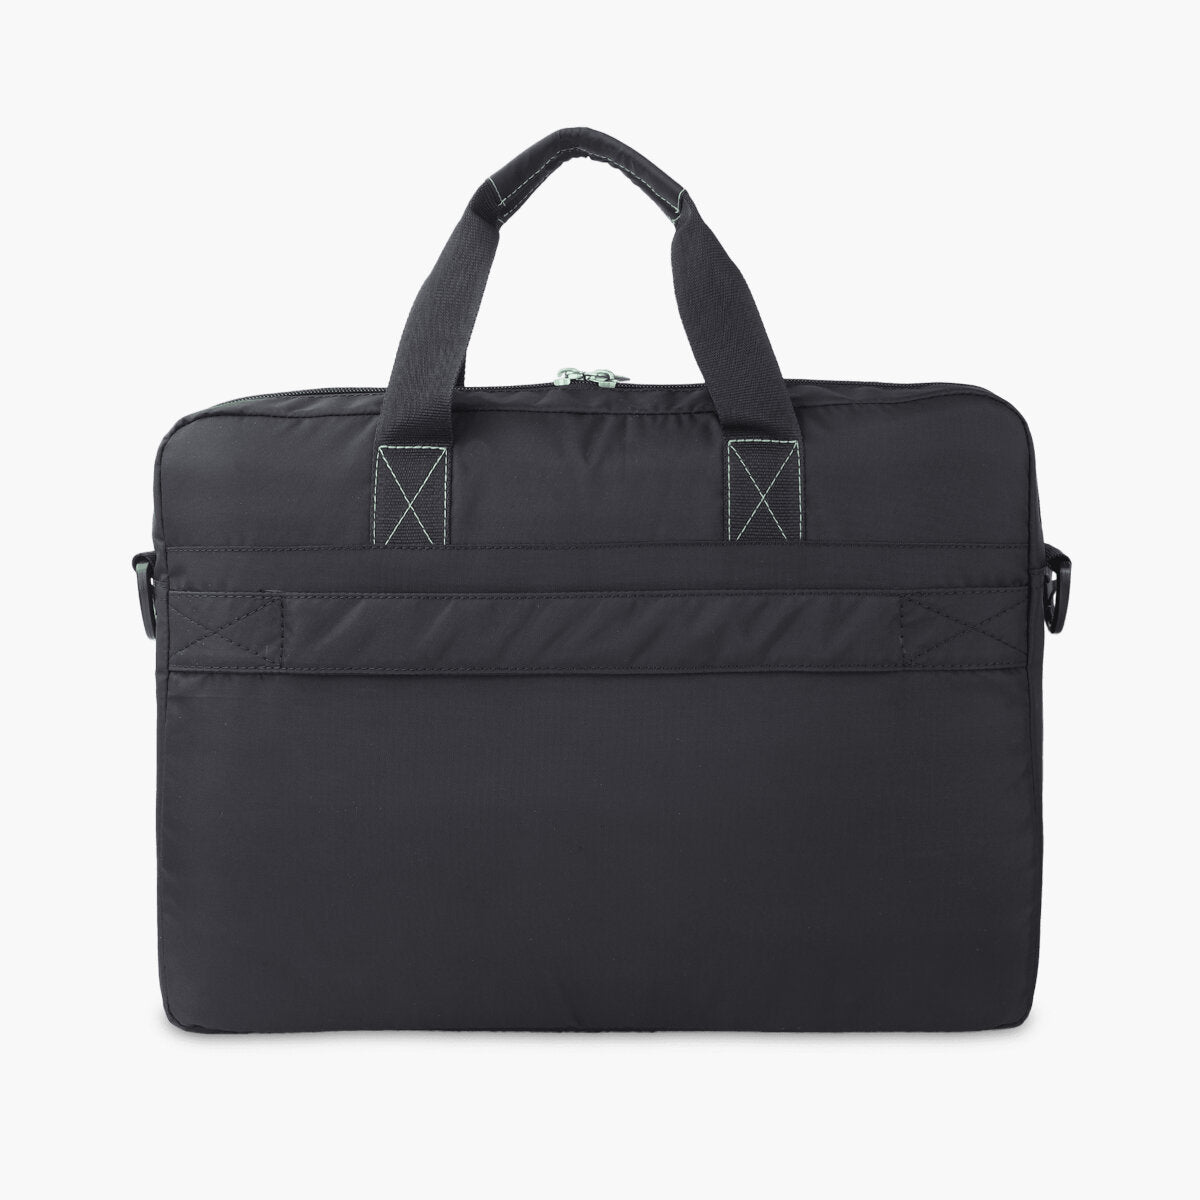 Black-Green | Protecta Pace Laptop Office Bag-4